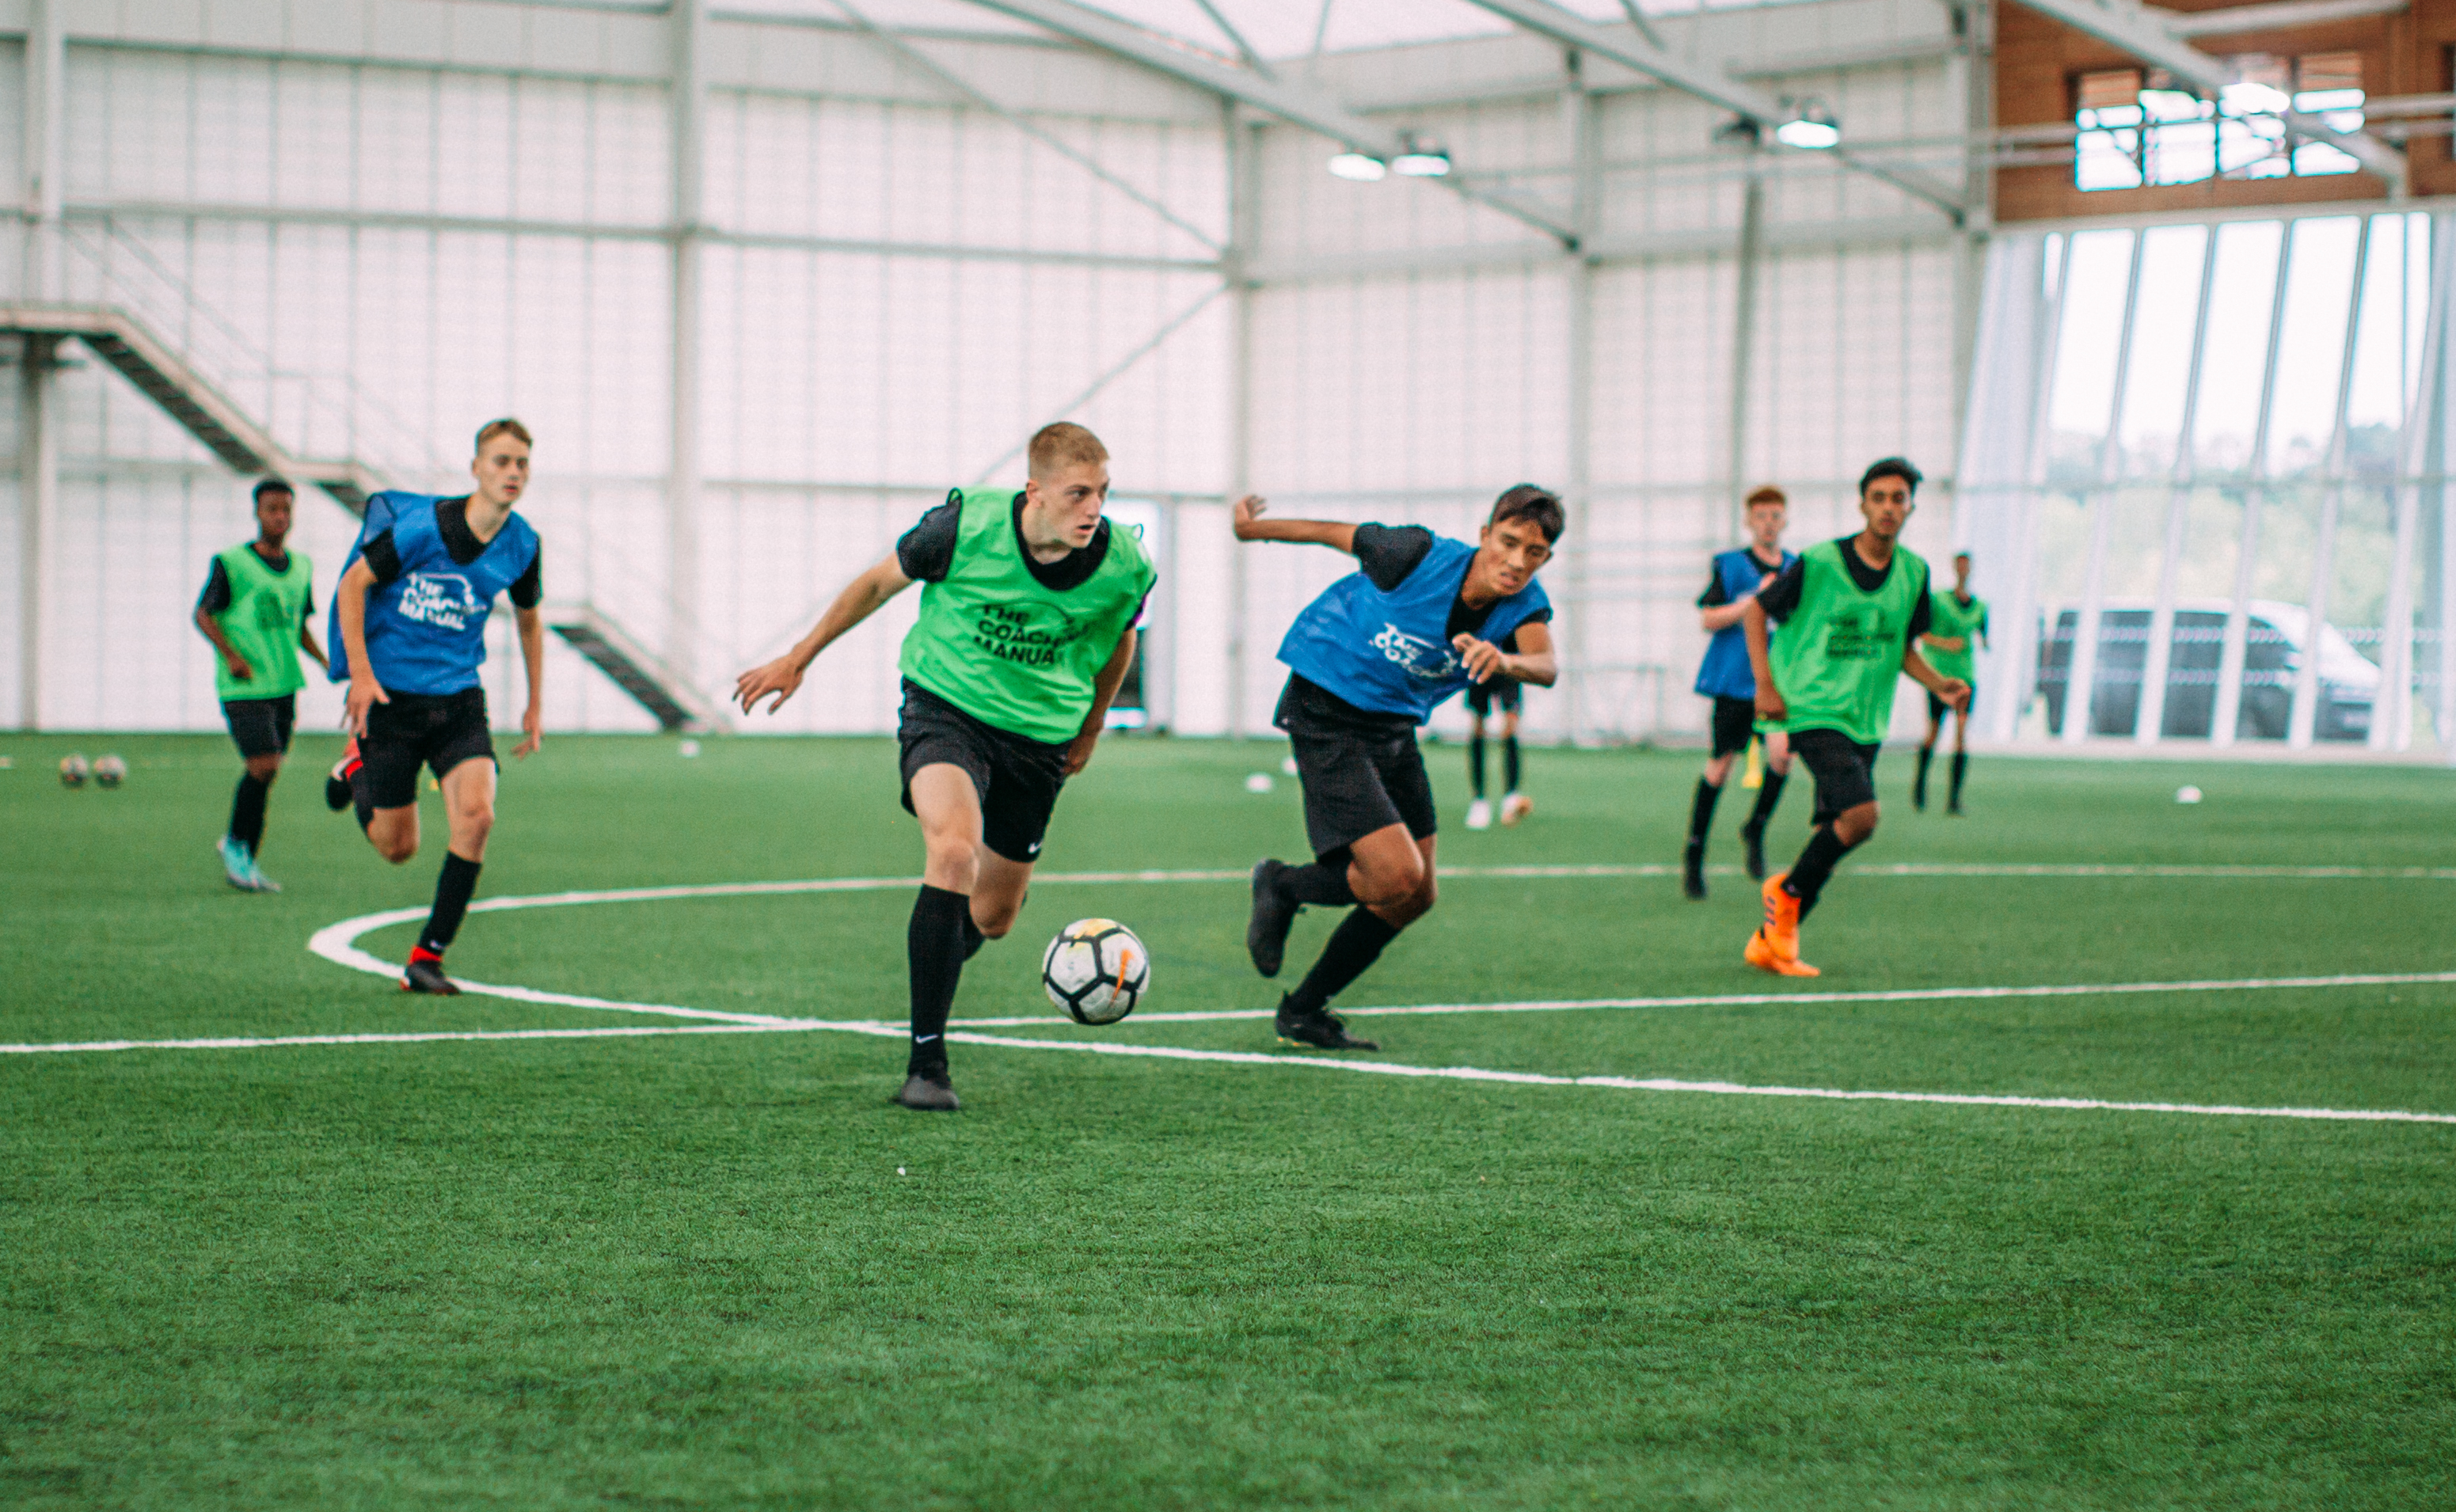 Tips for Introducing and Maintaining a Positive Club Culture